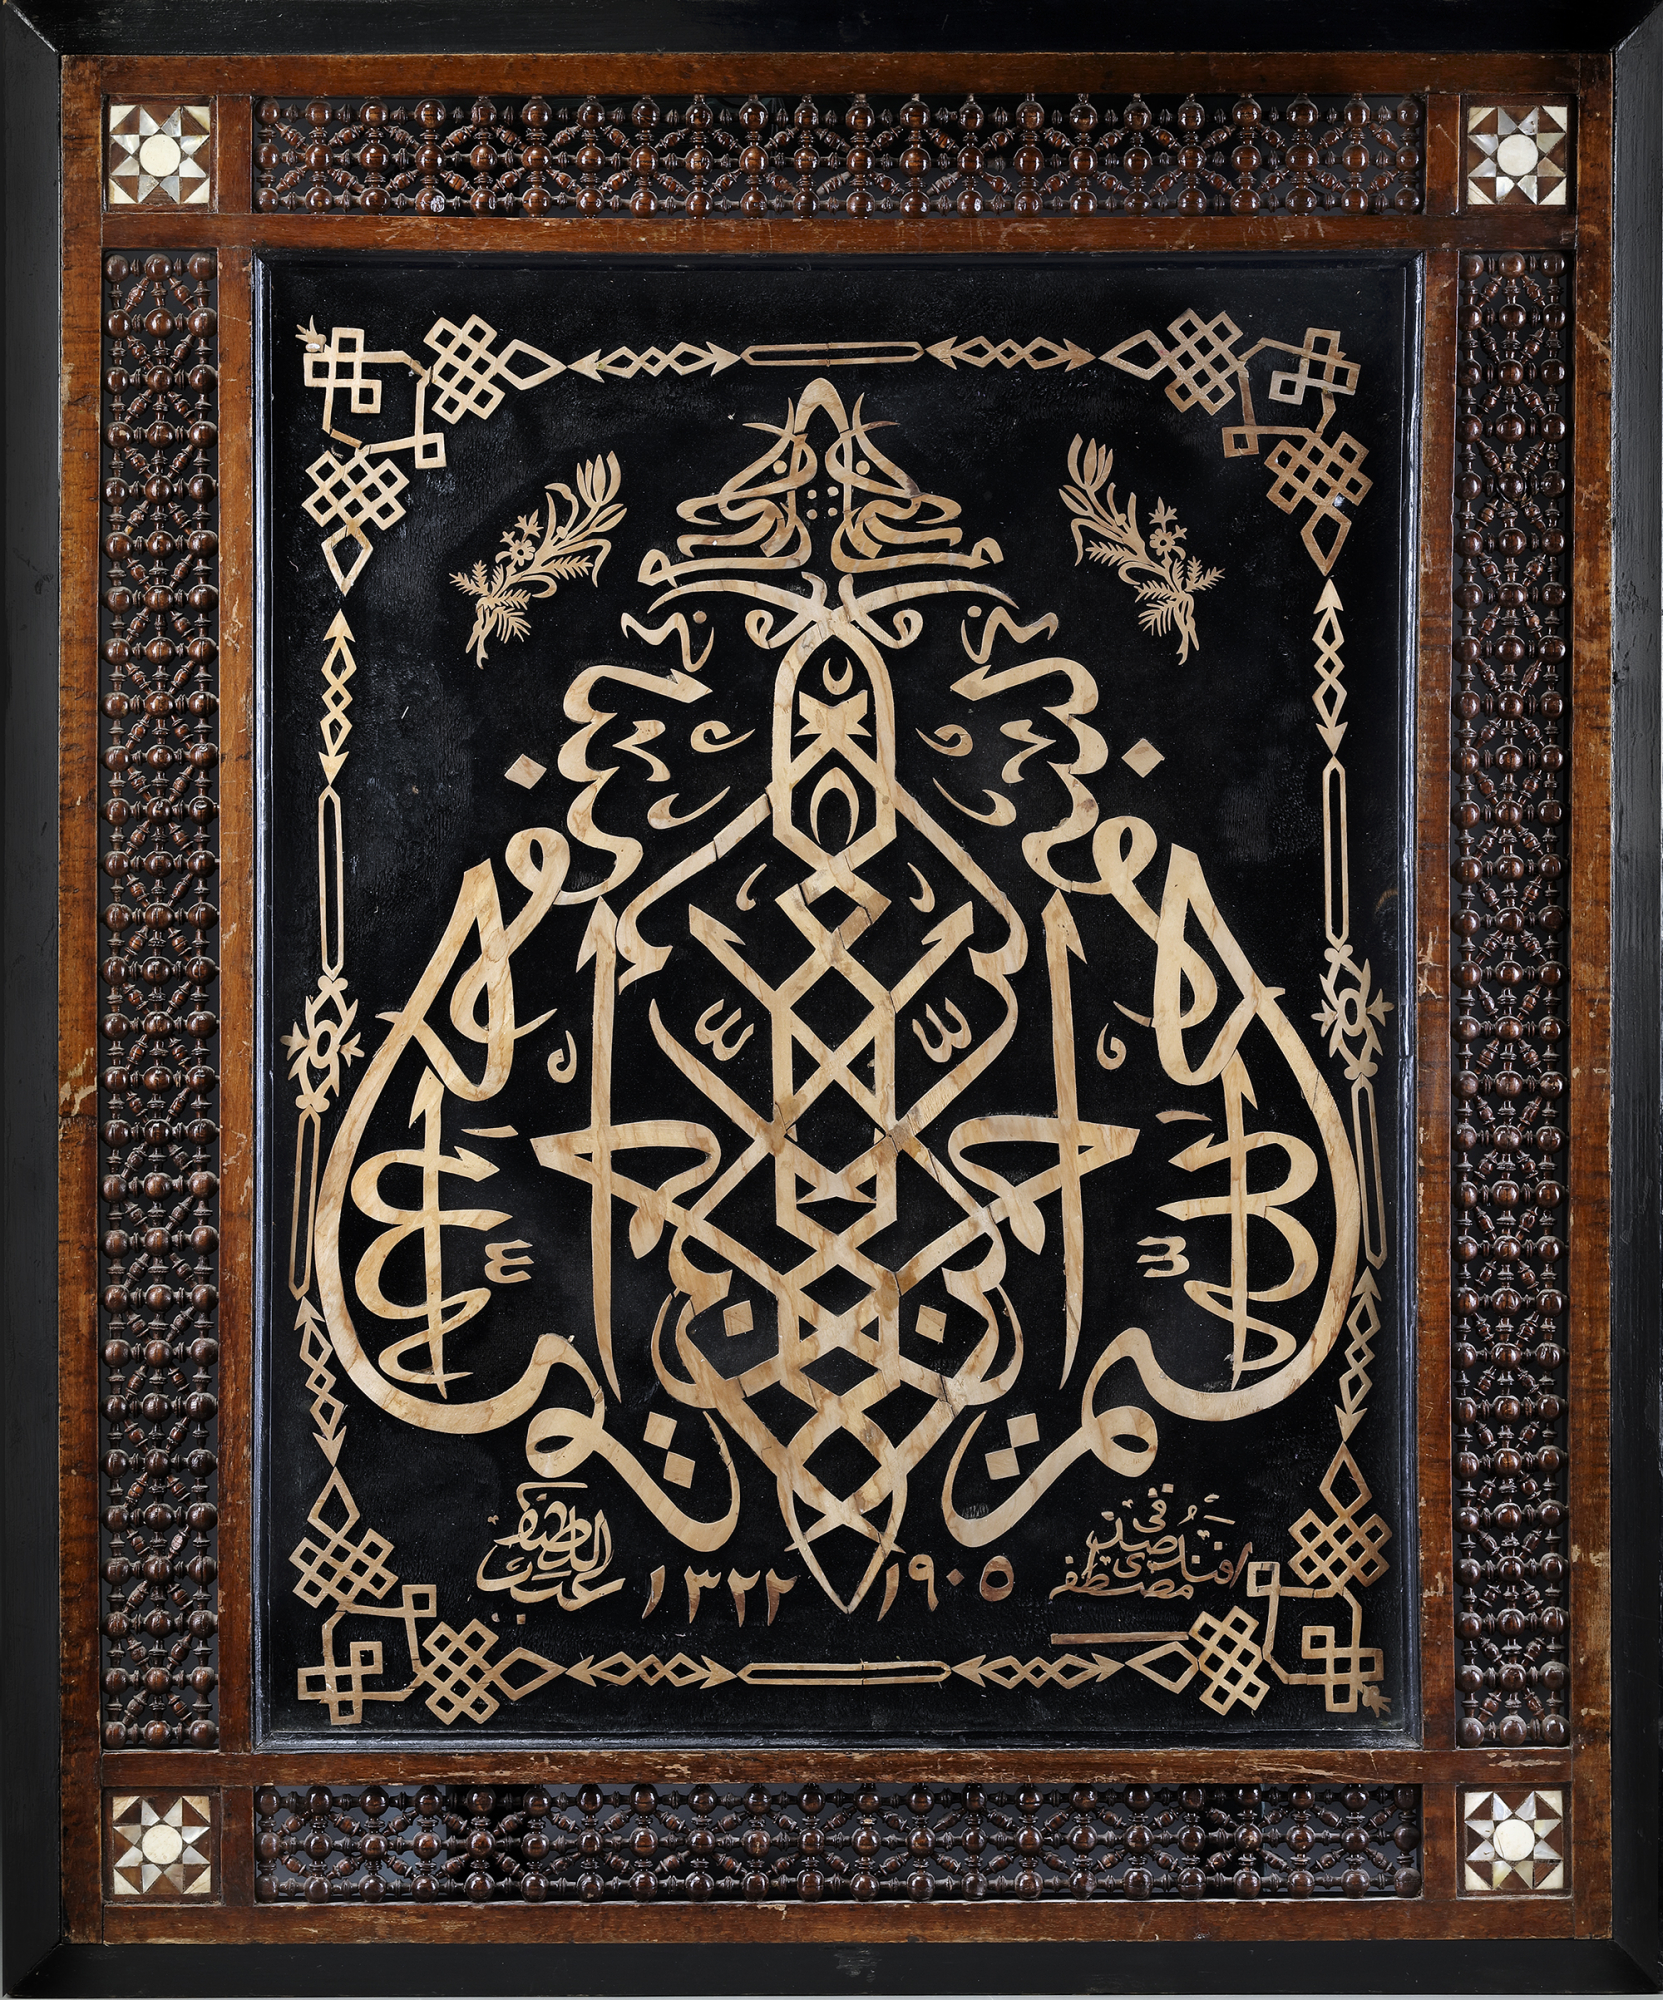 A SYRIAN OR EGYPTIAN FRAMED WOODEN CALLIGRAPHY CARVING ( KATI)